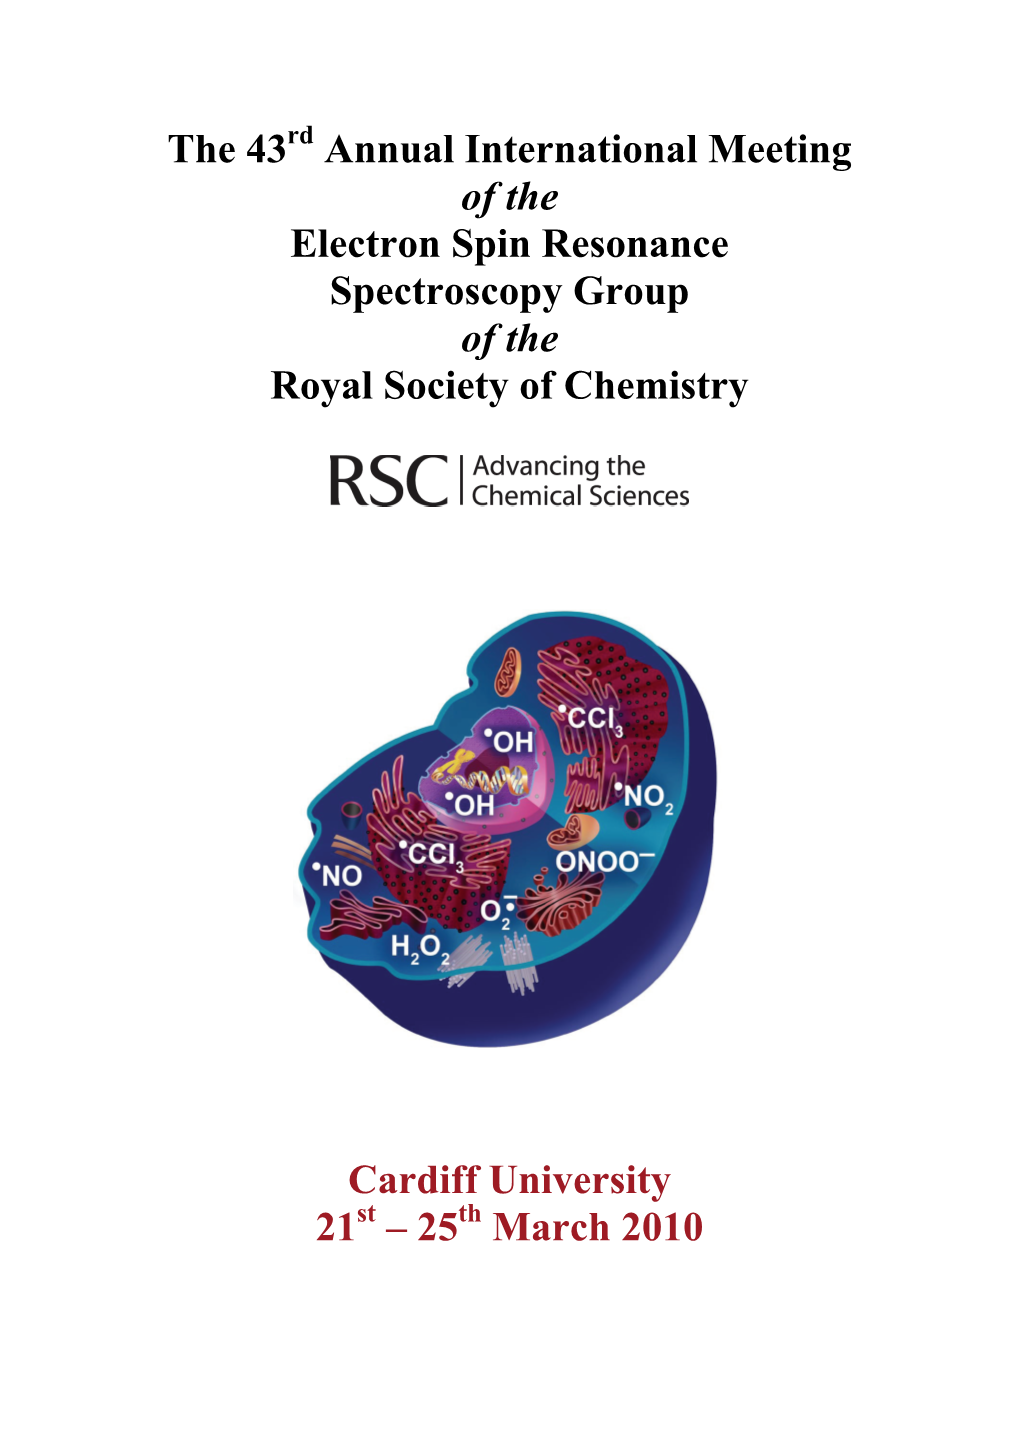 The 43 Annual International Meeting of the Electron Spin Resonance Spectroscopy Group of the Royal Society of Chemistry Cardiff